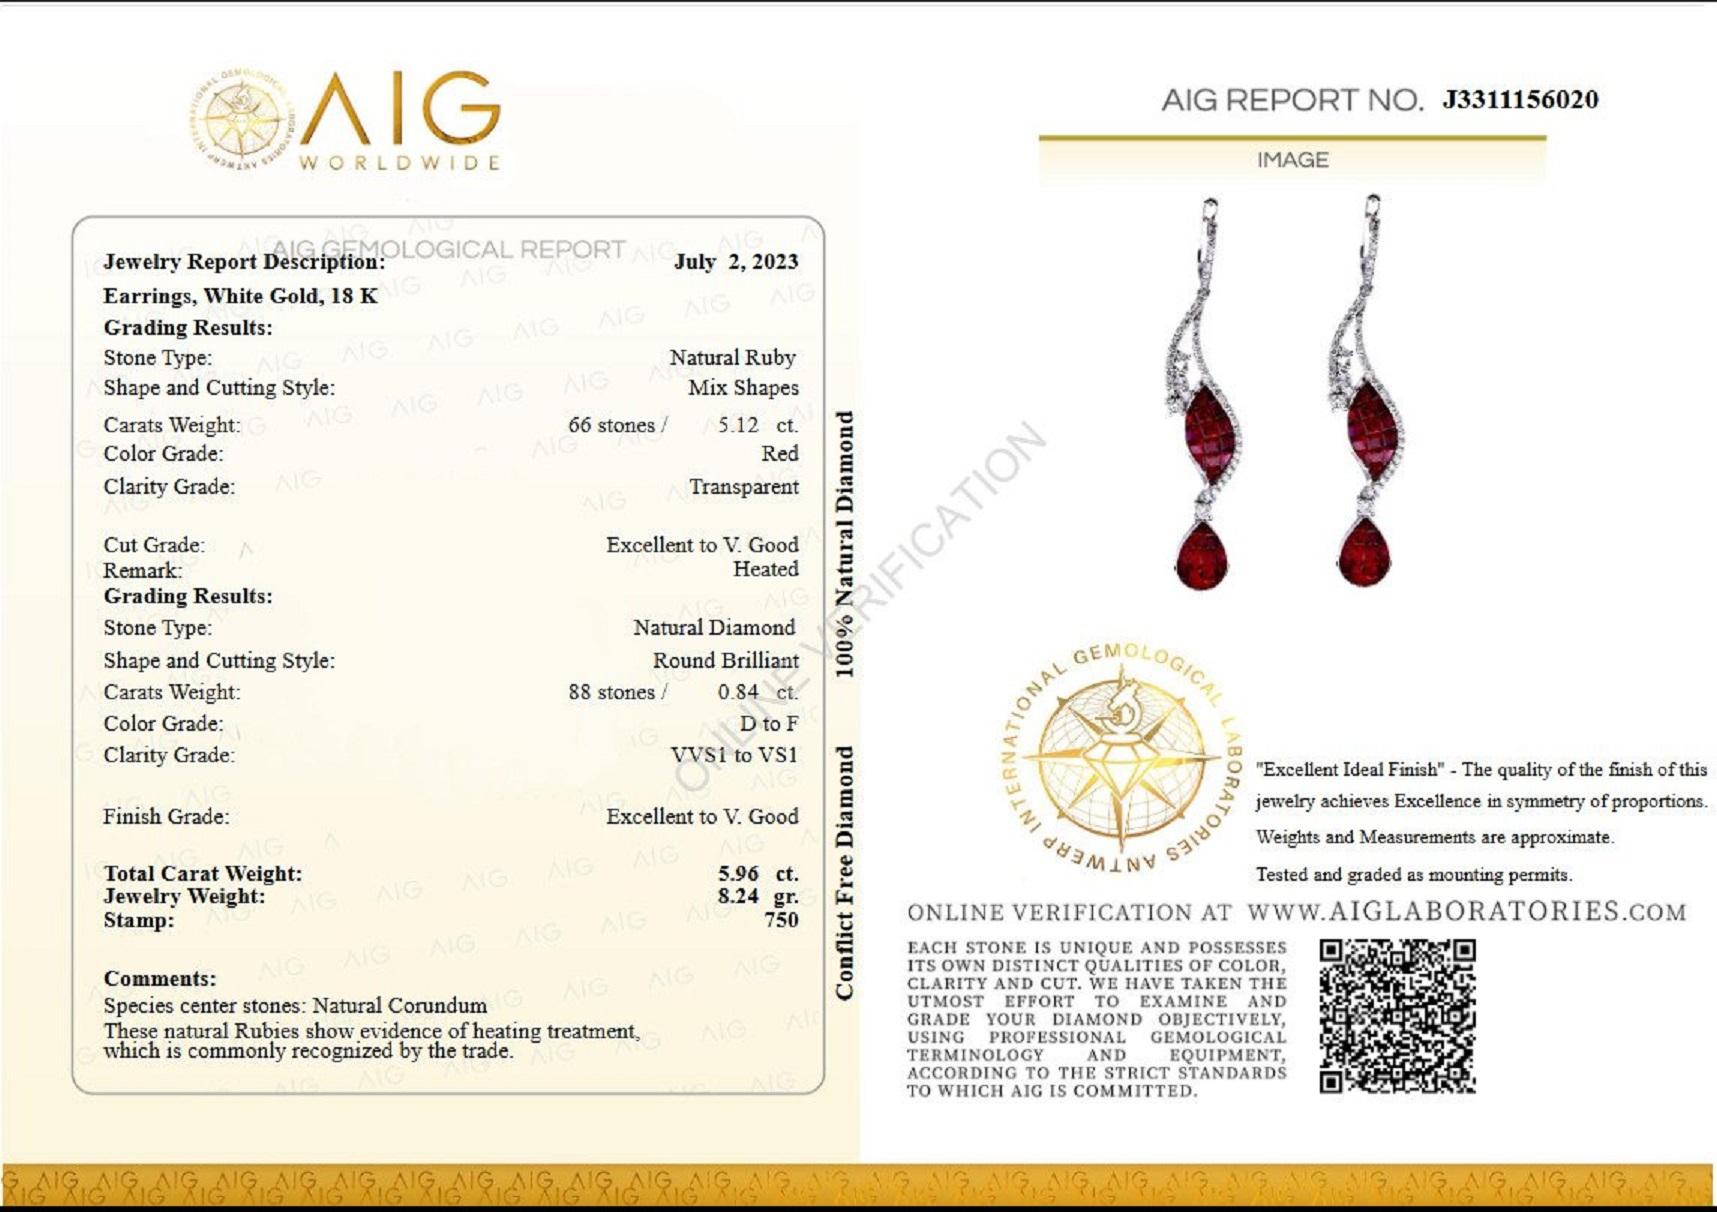 Center Natural Ruby:
Weight: 5.12 cttw (pair)/66 stones
Color: Red
Shape: Mix Shapes
These natural Rubies show evidence of heating treatment, which is commonly recognized by the trade.

Side Stones:
___________
Natural Diamonds
Carat: 0.84